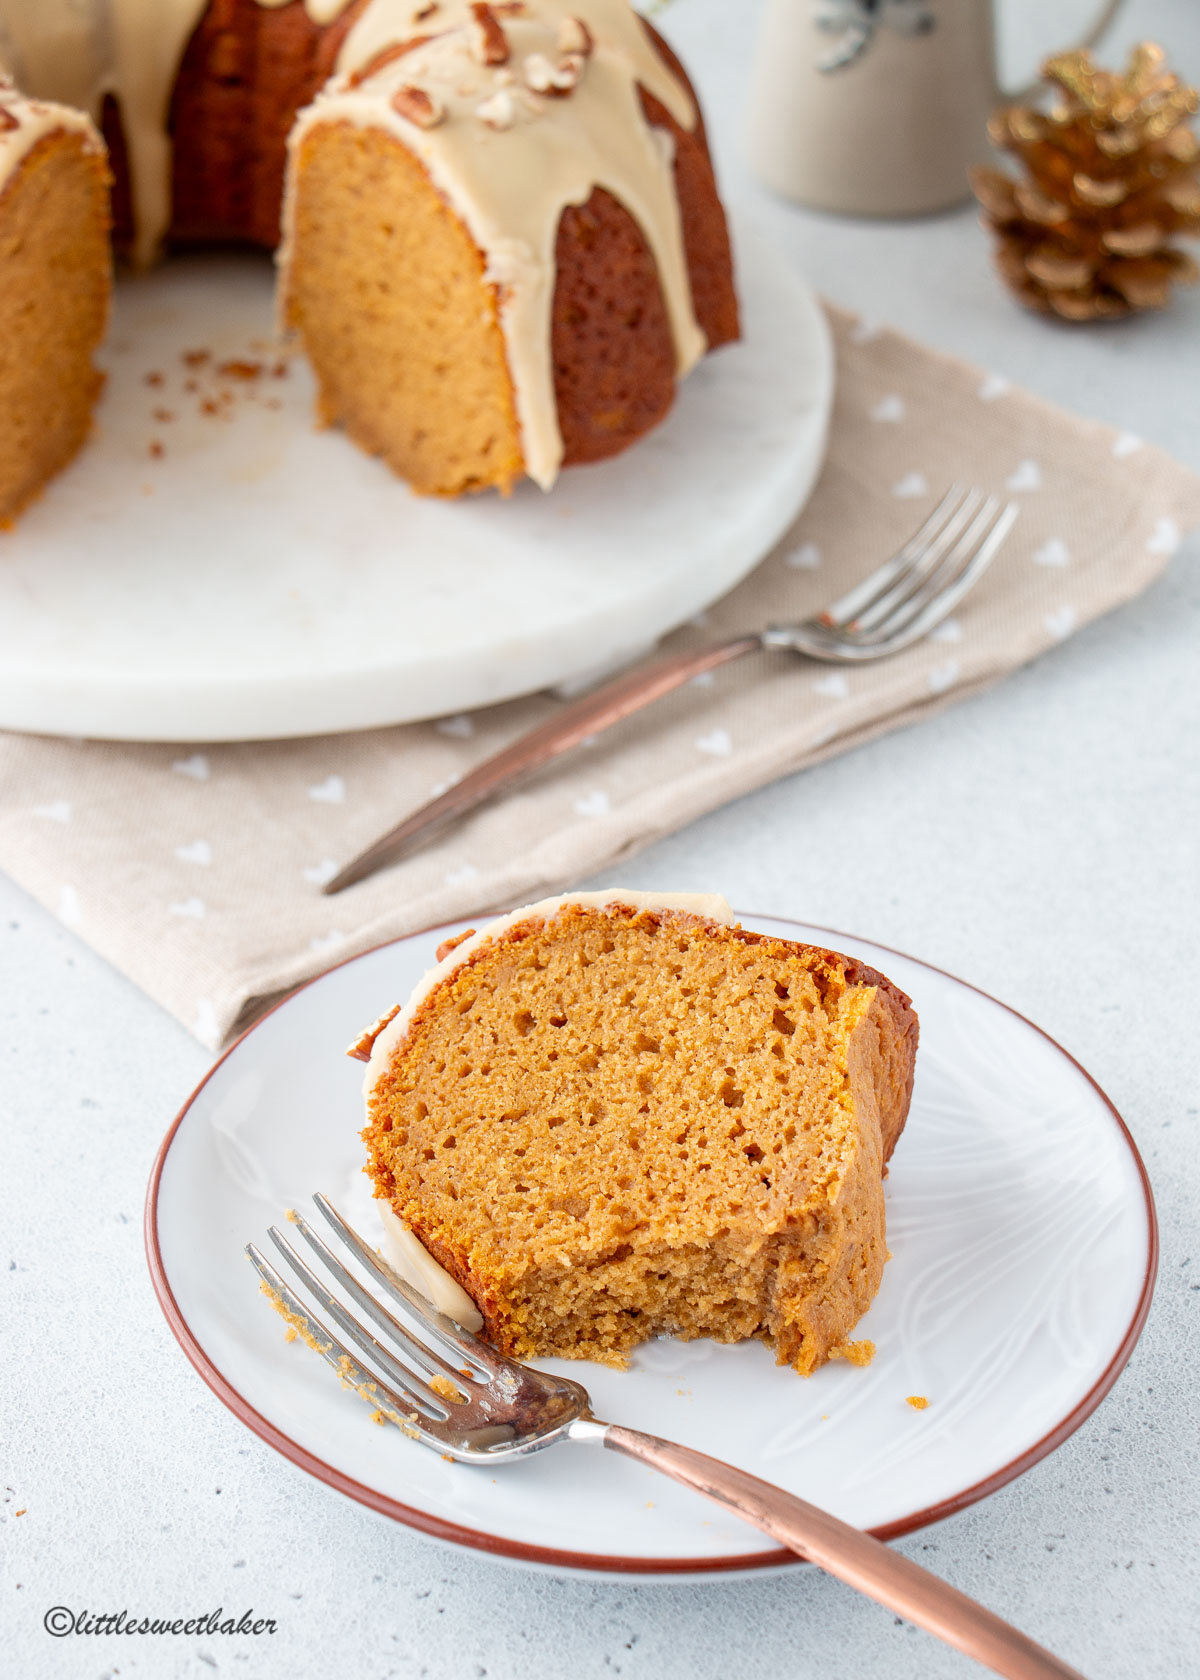 A slice of sweet potato bundt cake on a plate with a fork and piece missing.